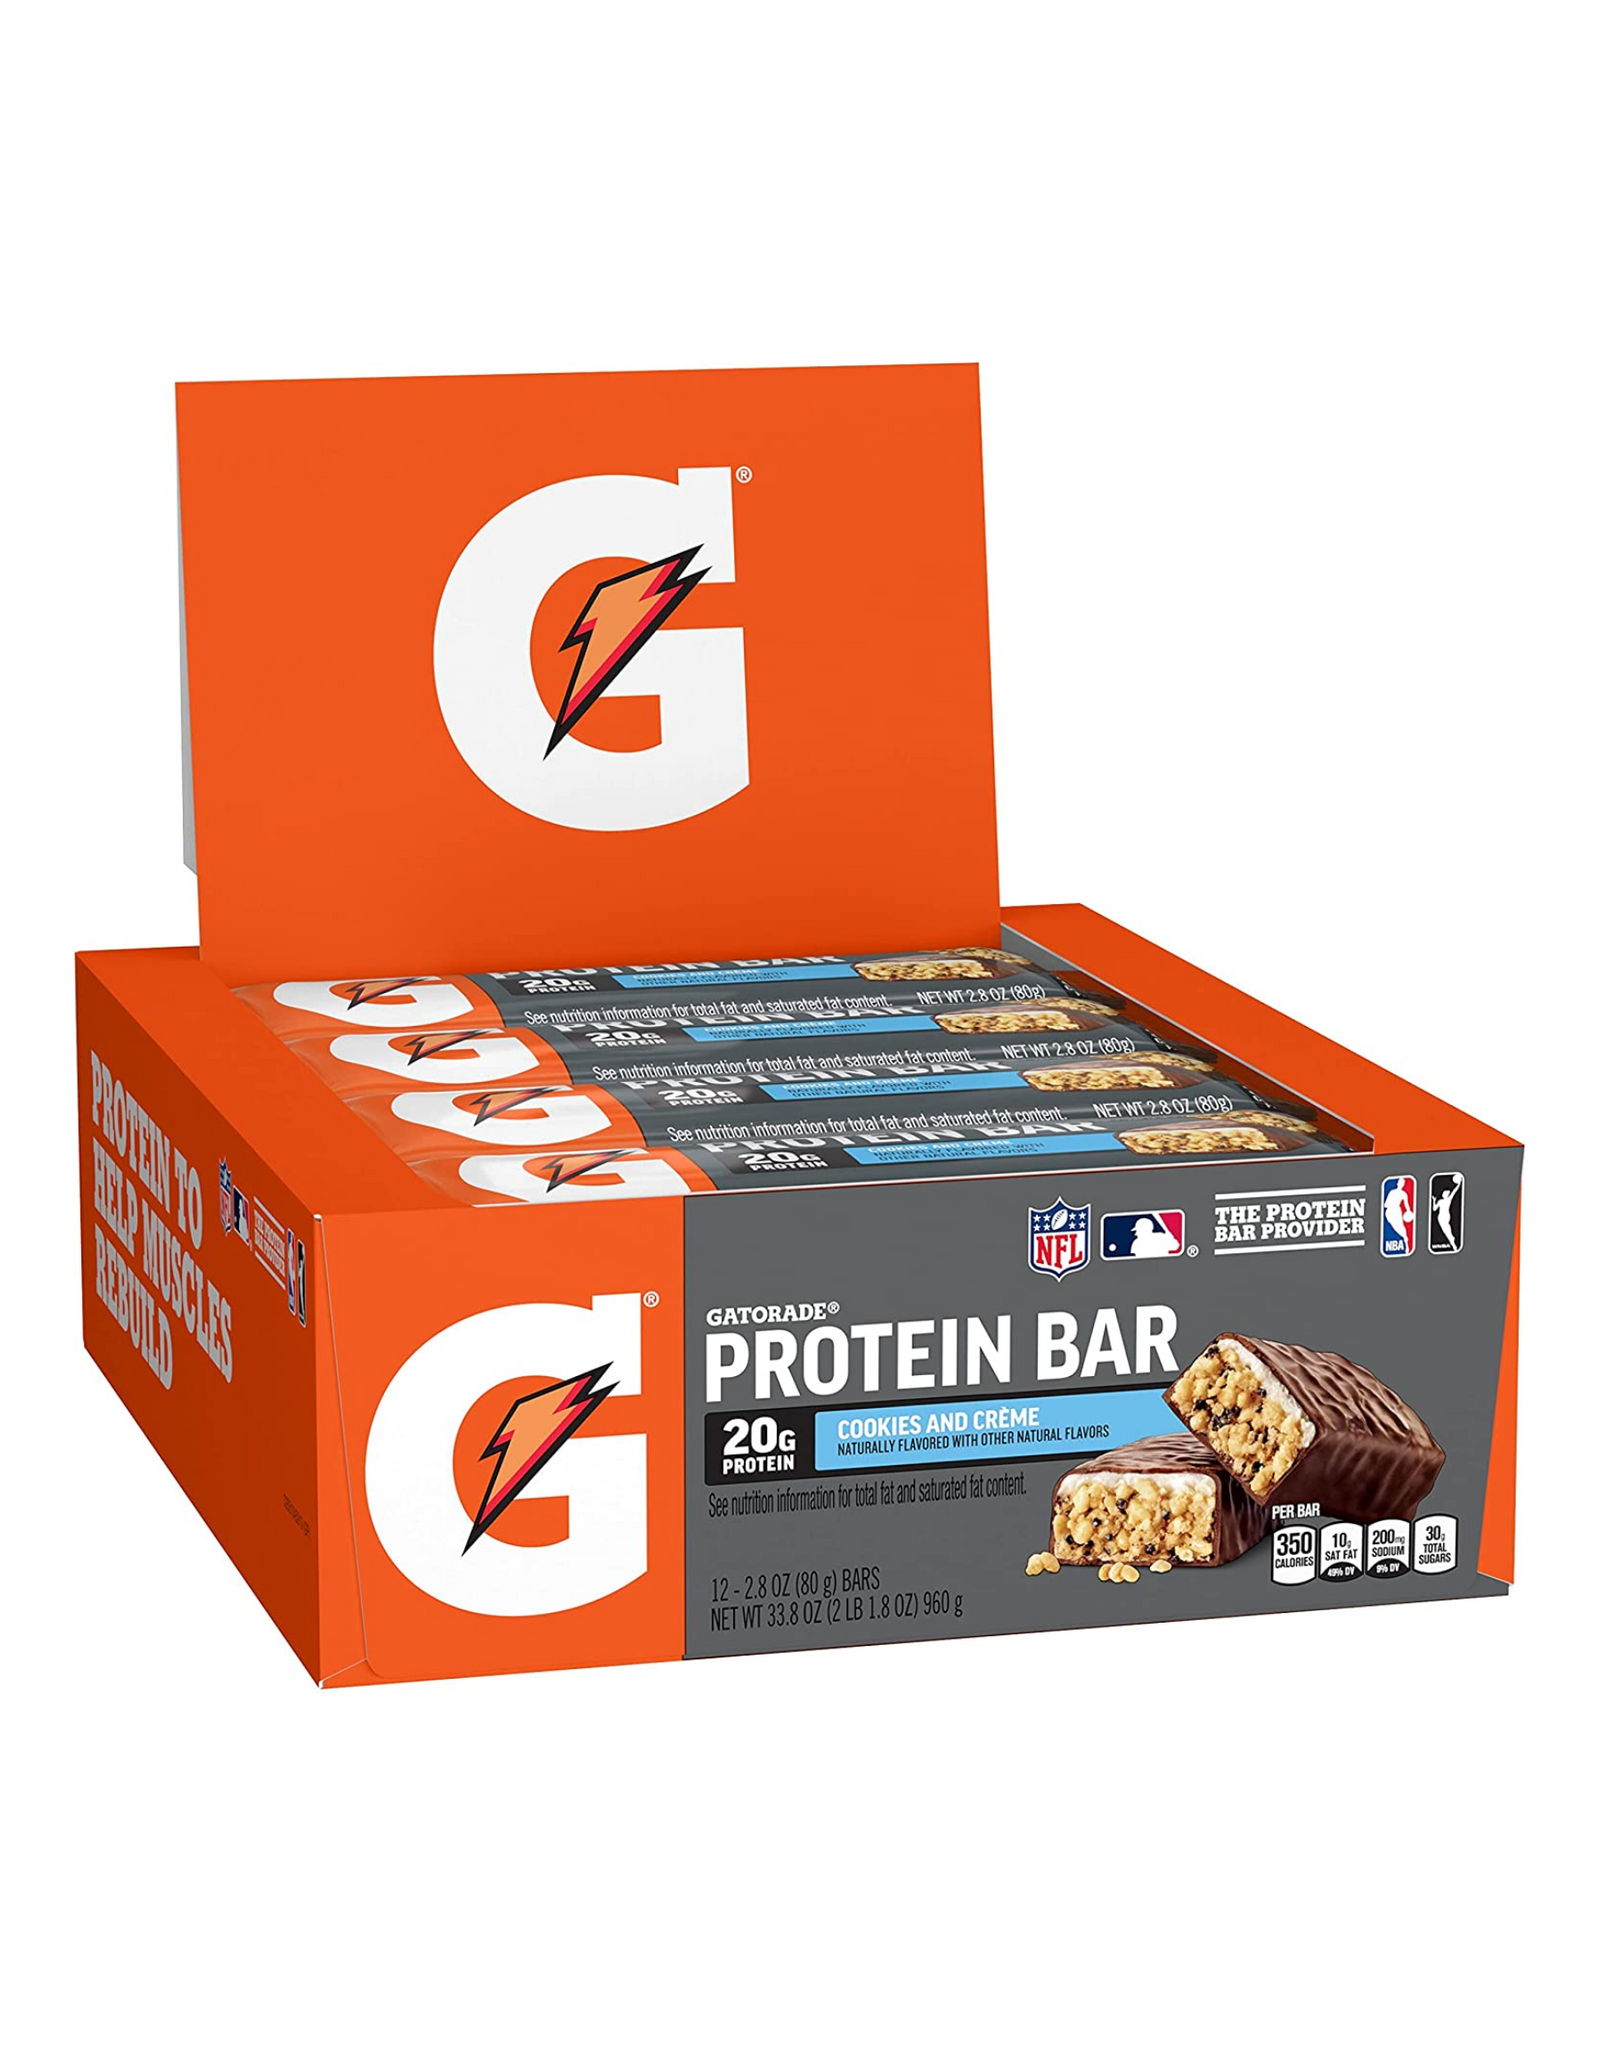 Gatorade Whey Protein Bars with 20g Protein, Cookies & Cream, 2.8 oz, 12 Count (Pack of 1)